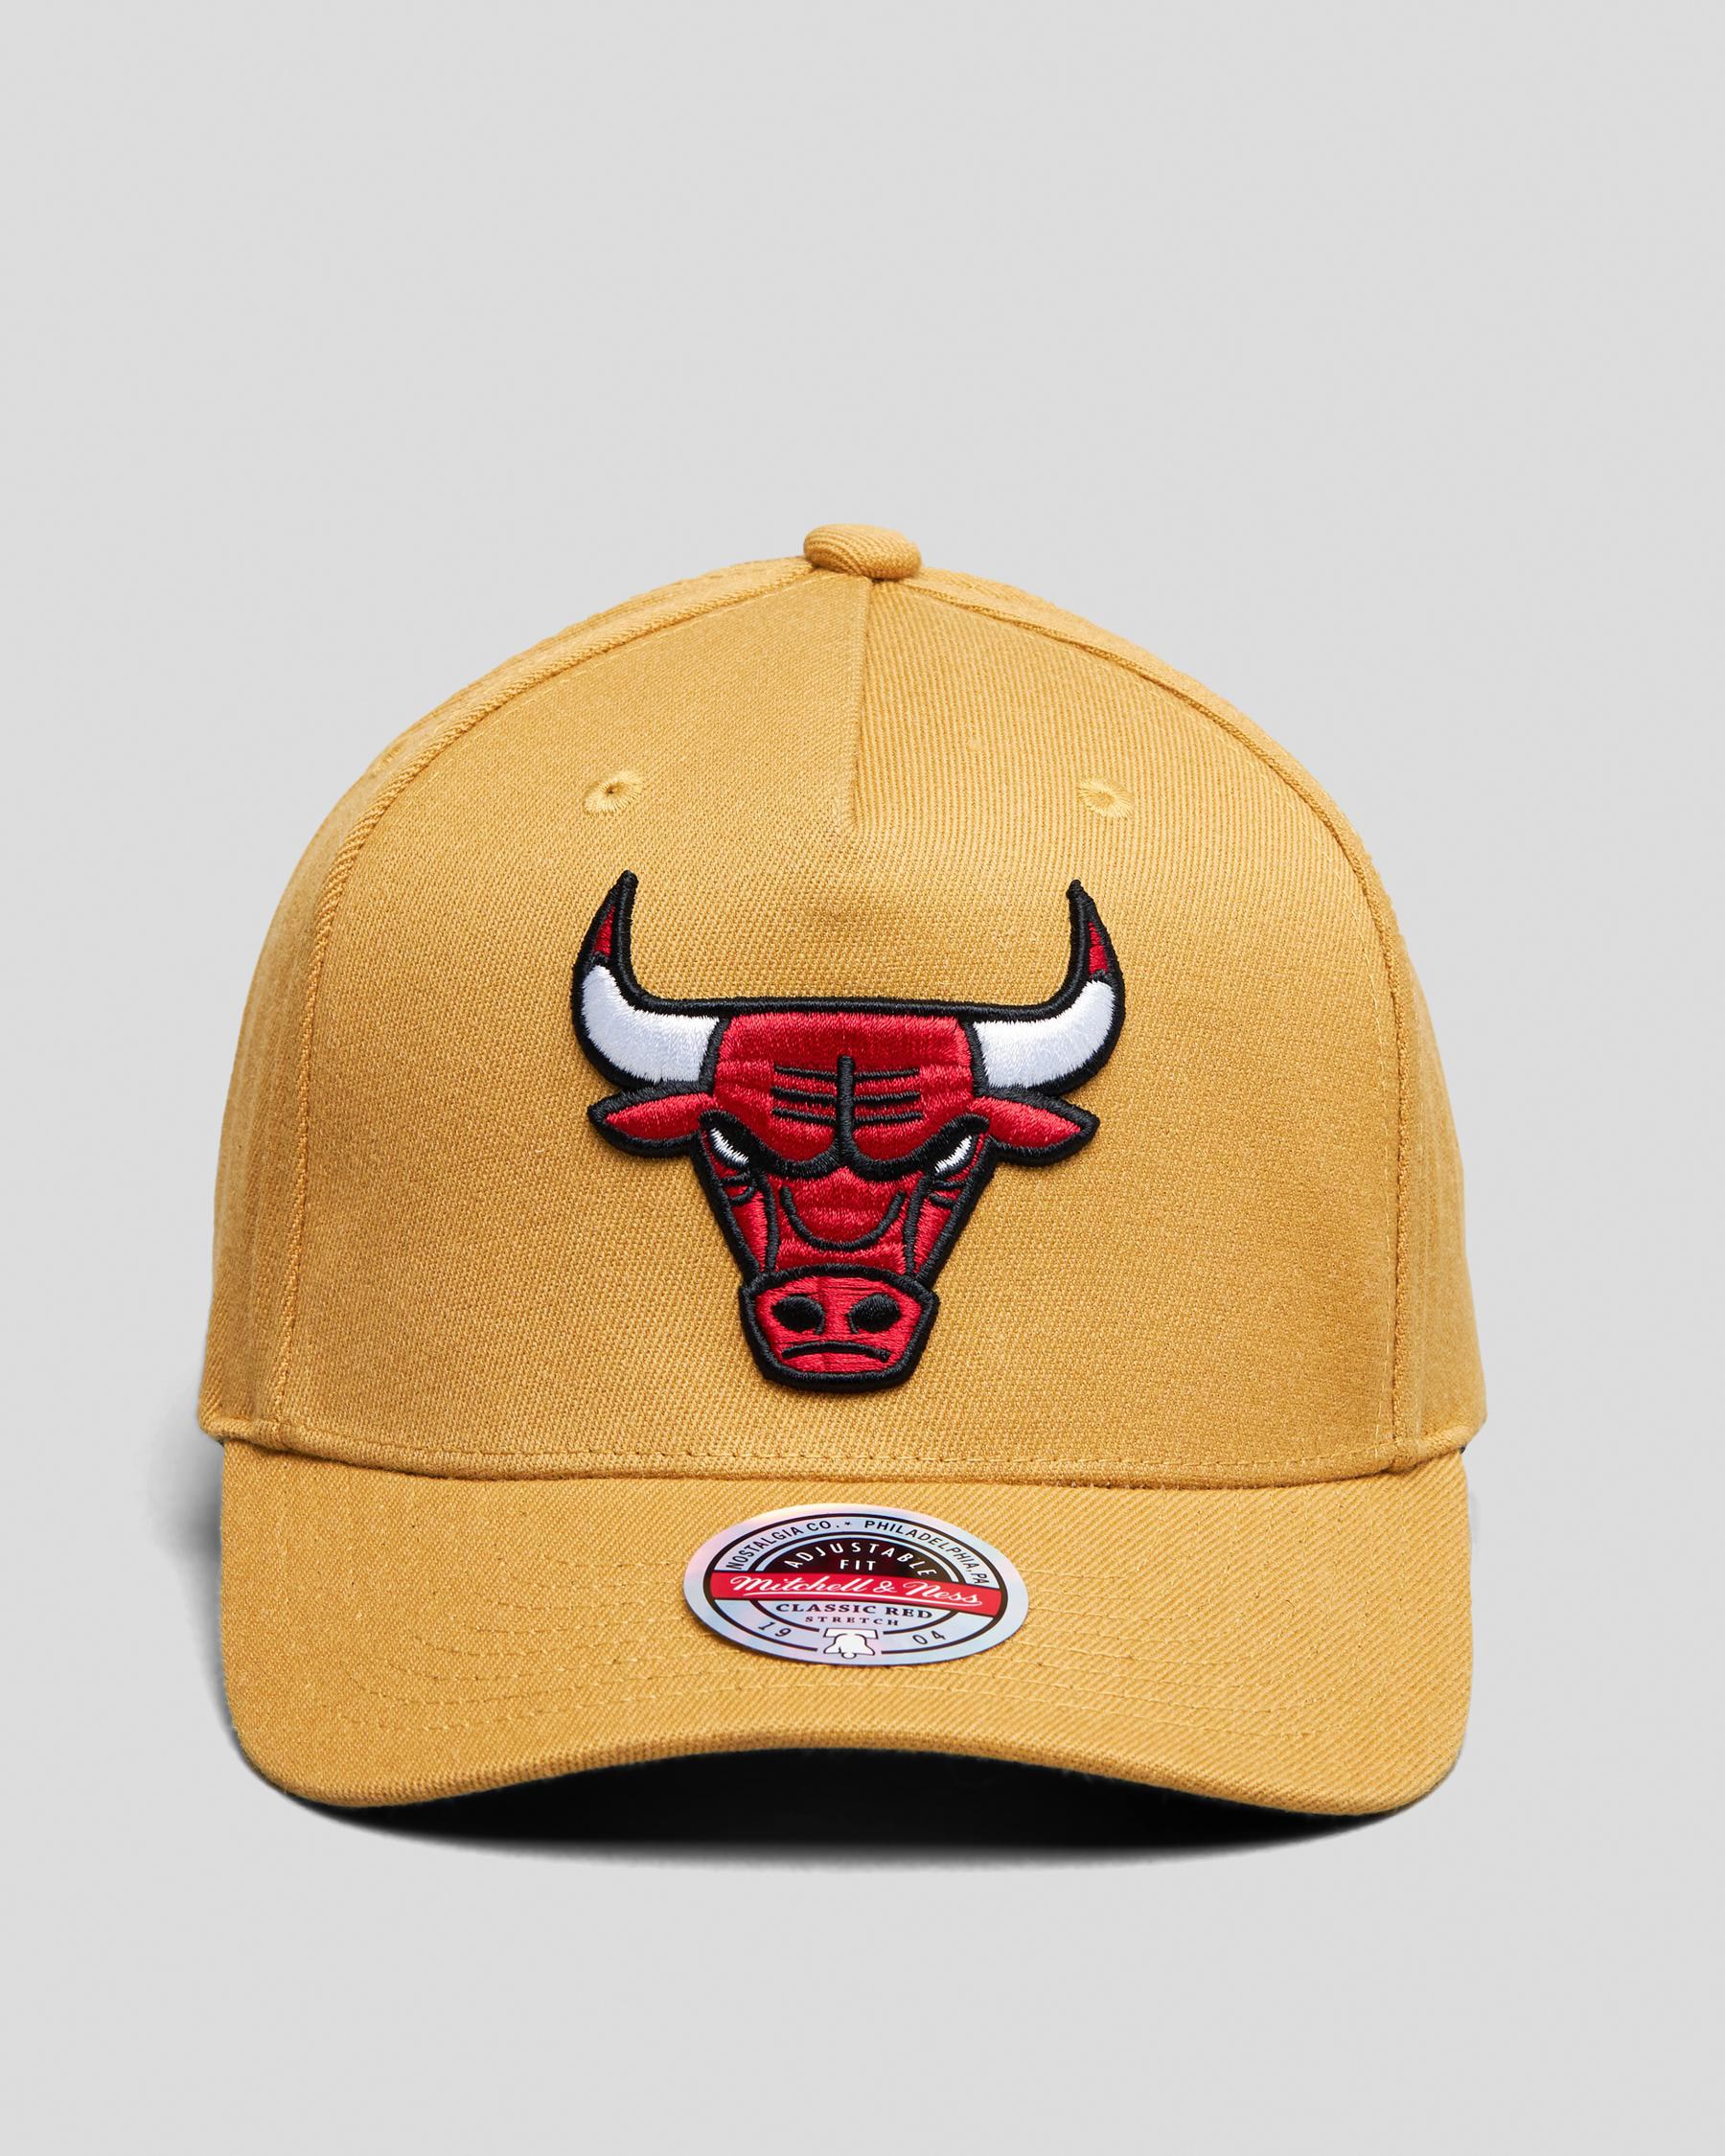 Mitchell & Ness 110 Bulls Cap In Black - Fast Shipping & Easy Returns -  City Beach United States